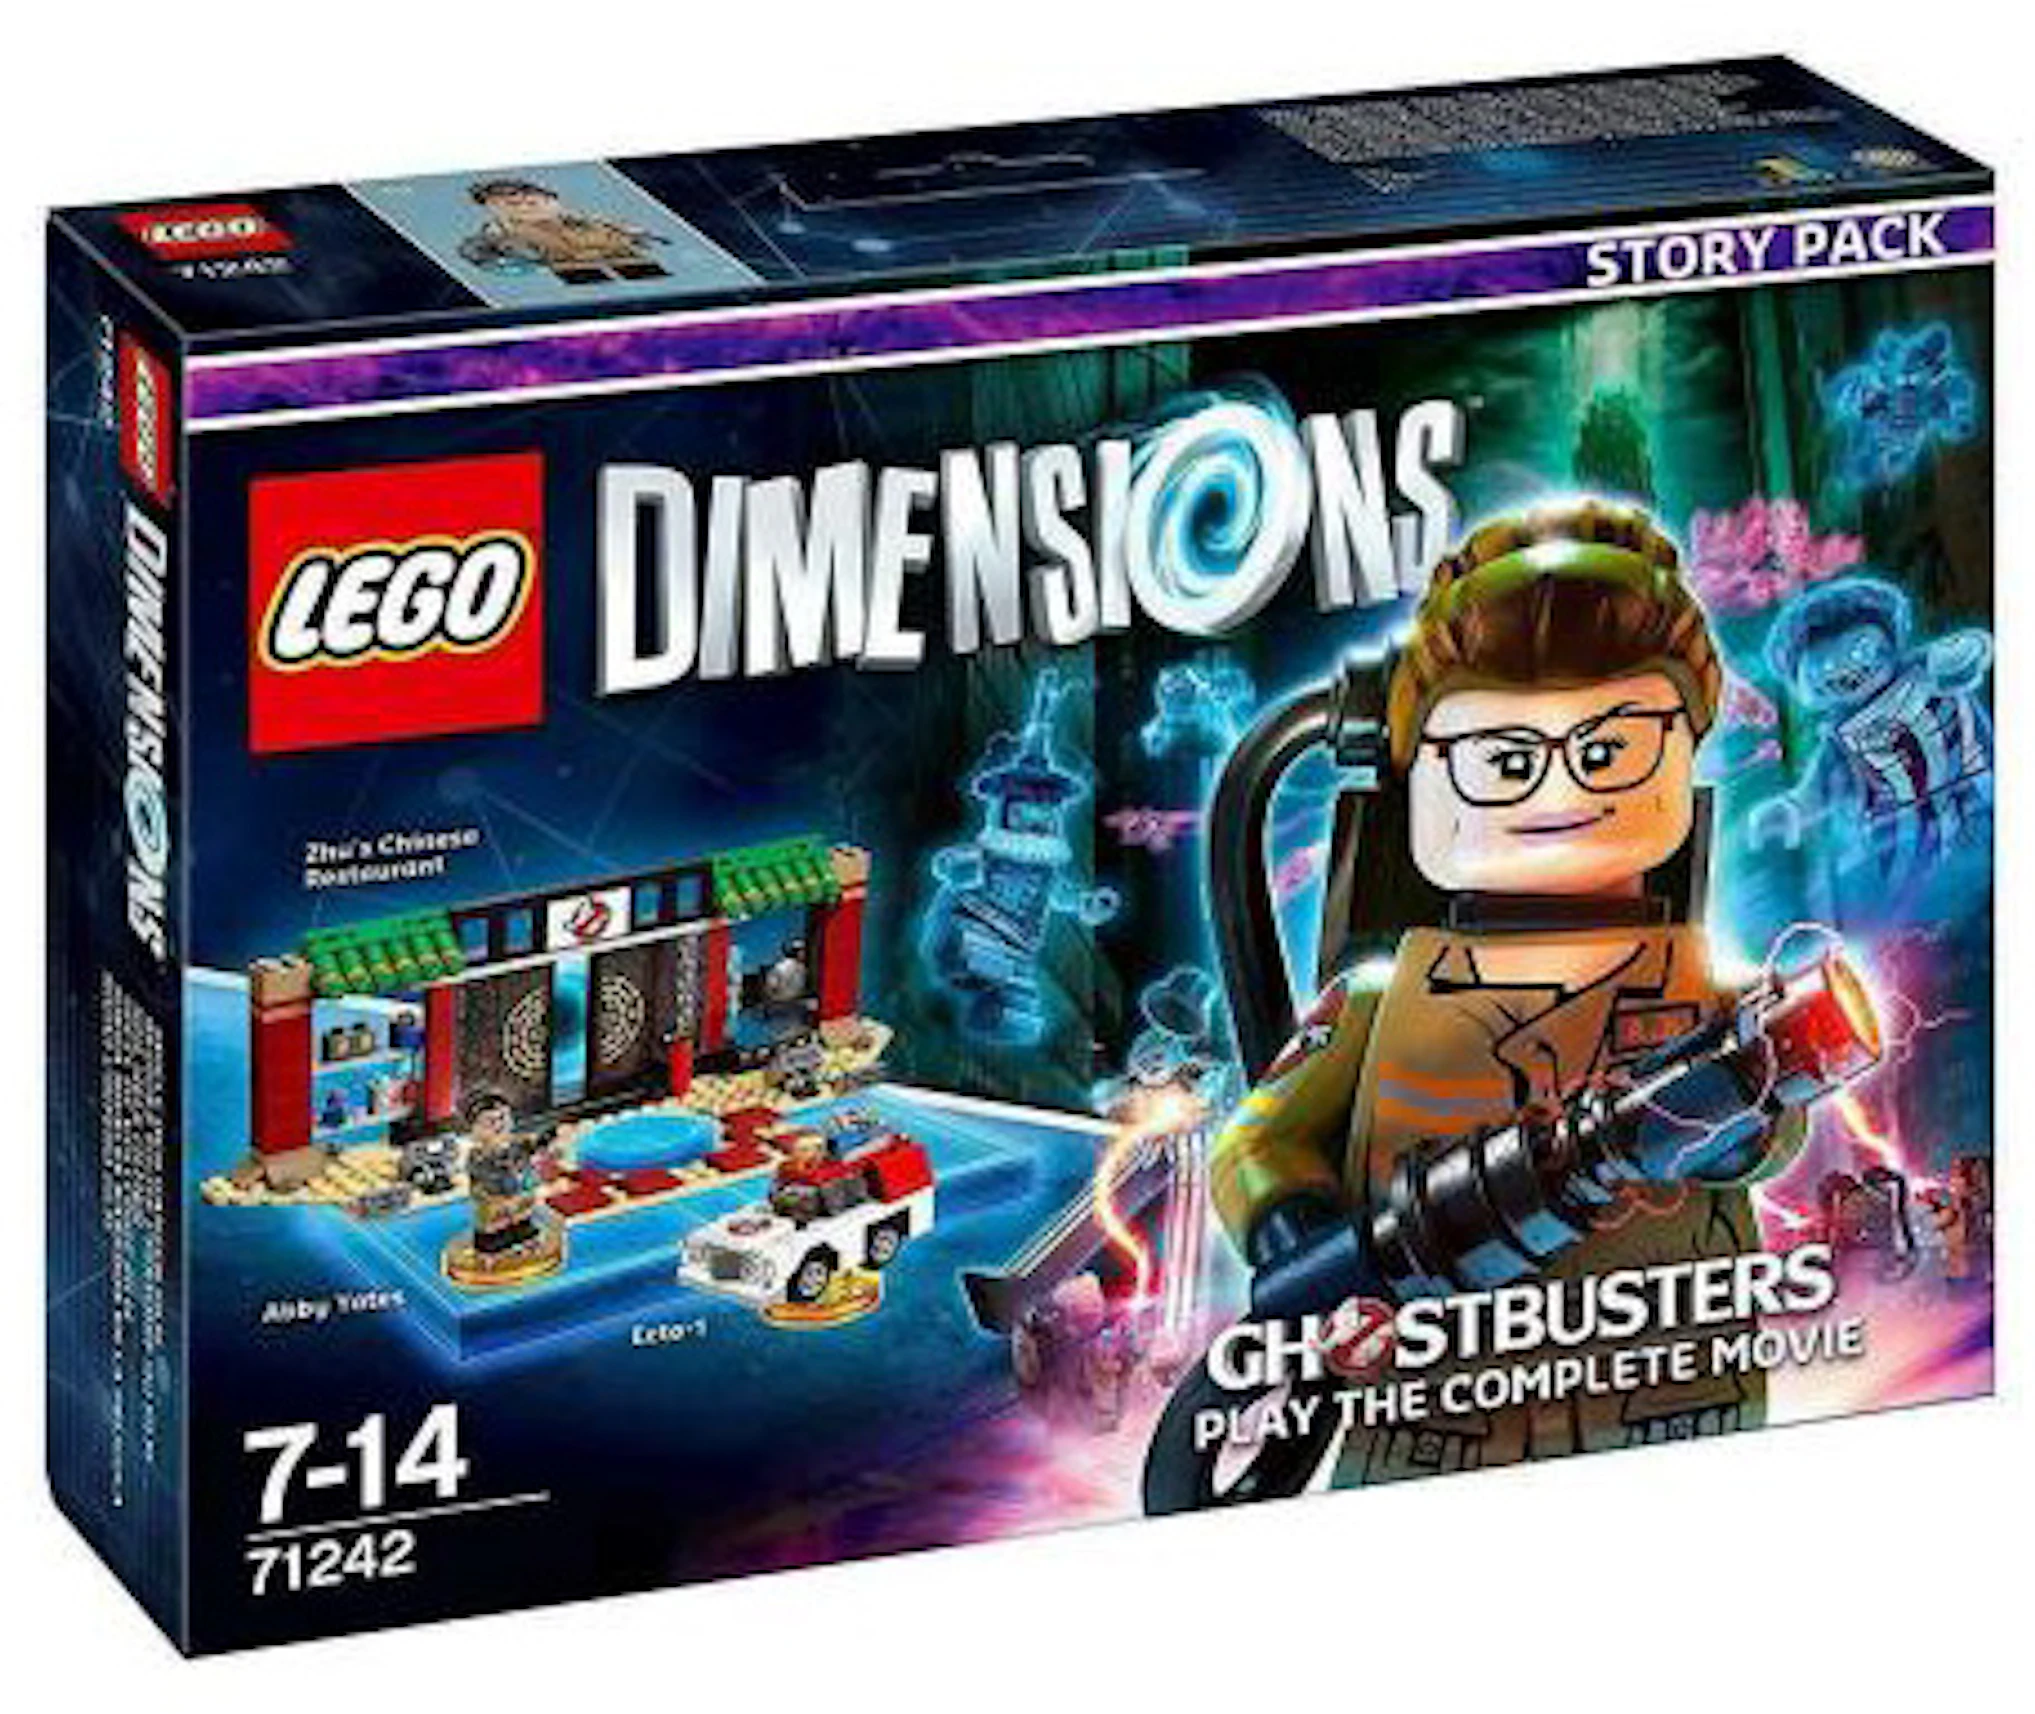 robot Huis tempo LEGO Dimensions New Ghostbusters: Play the Complete Movie Set 71242 - US